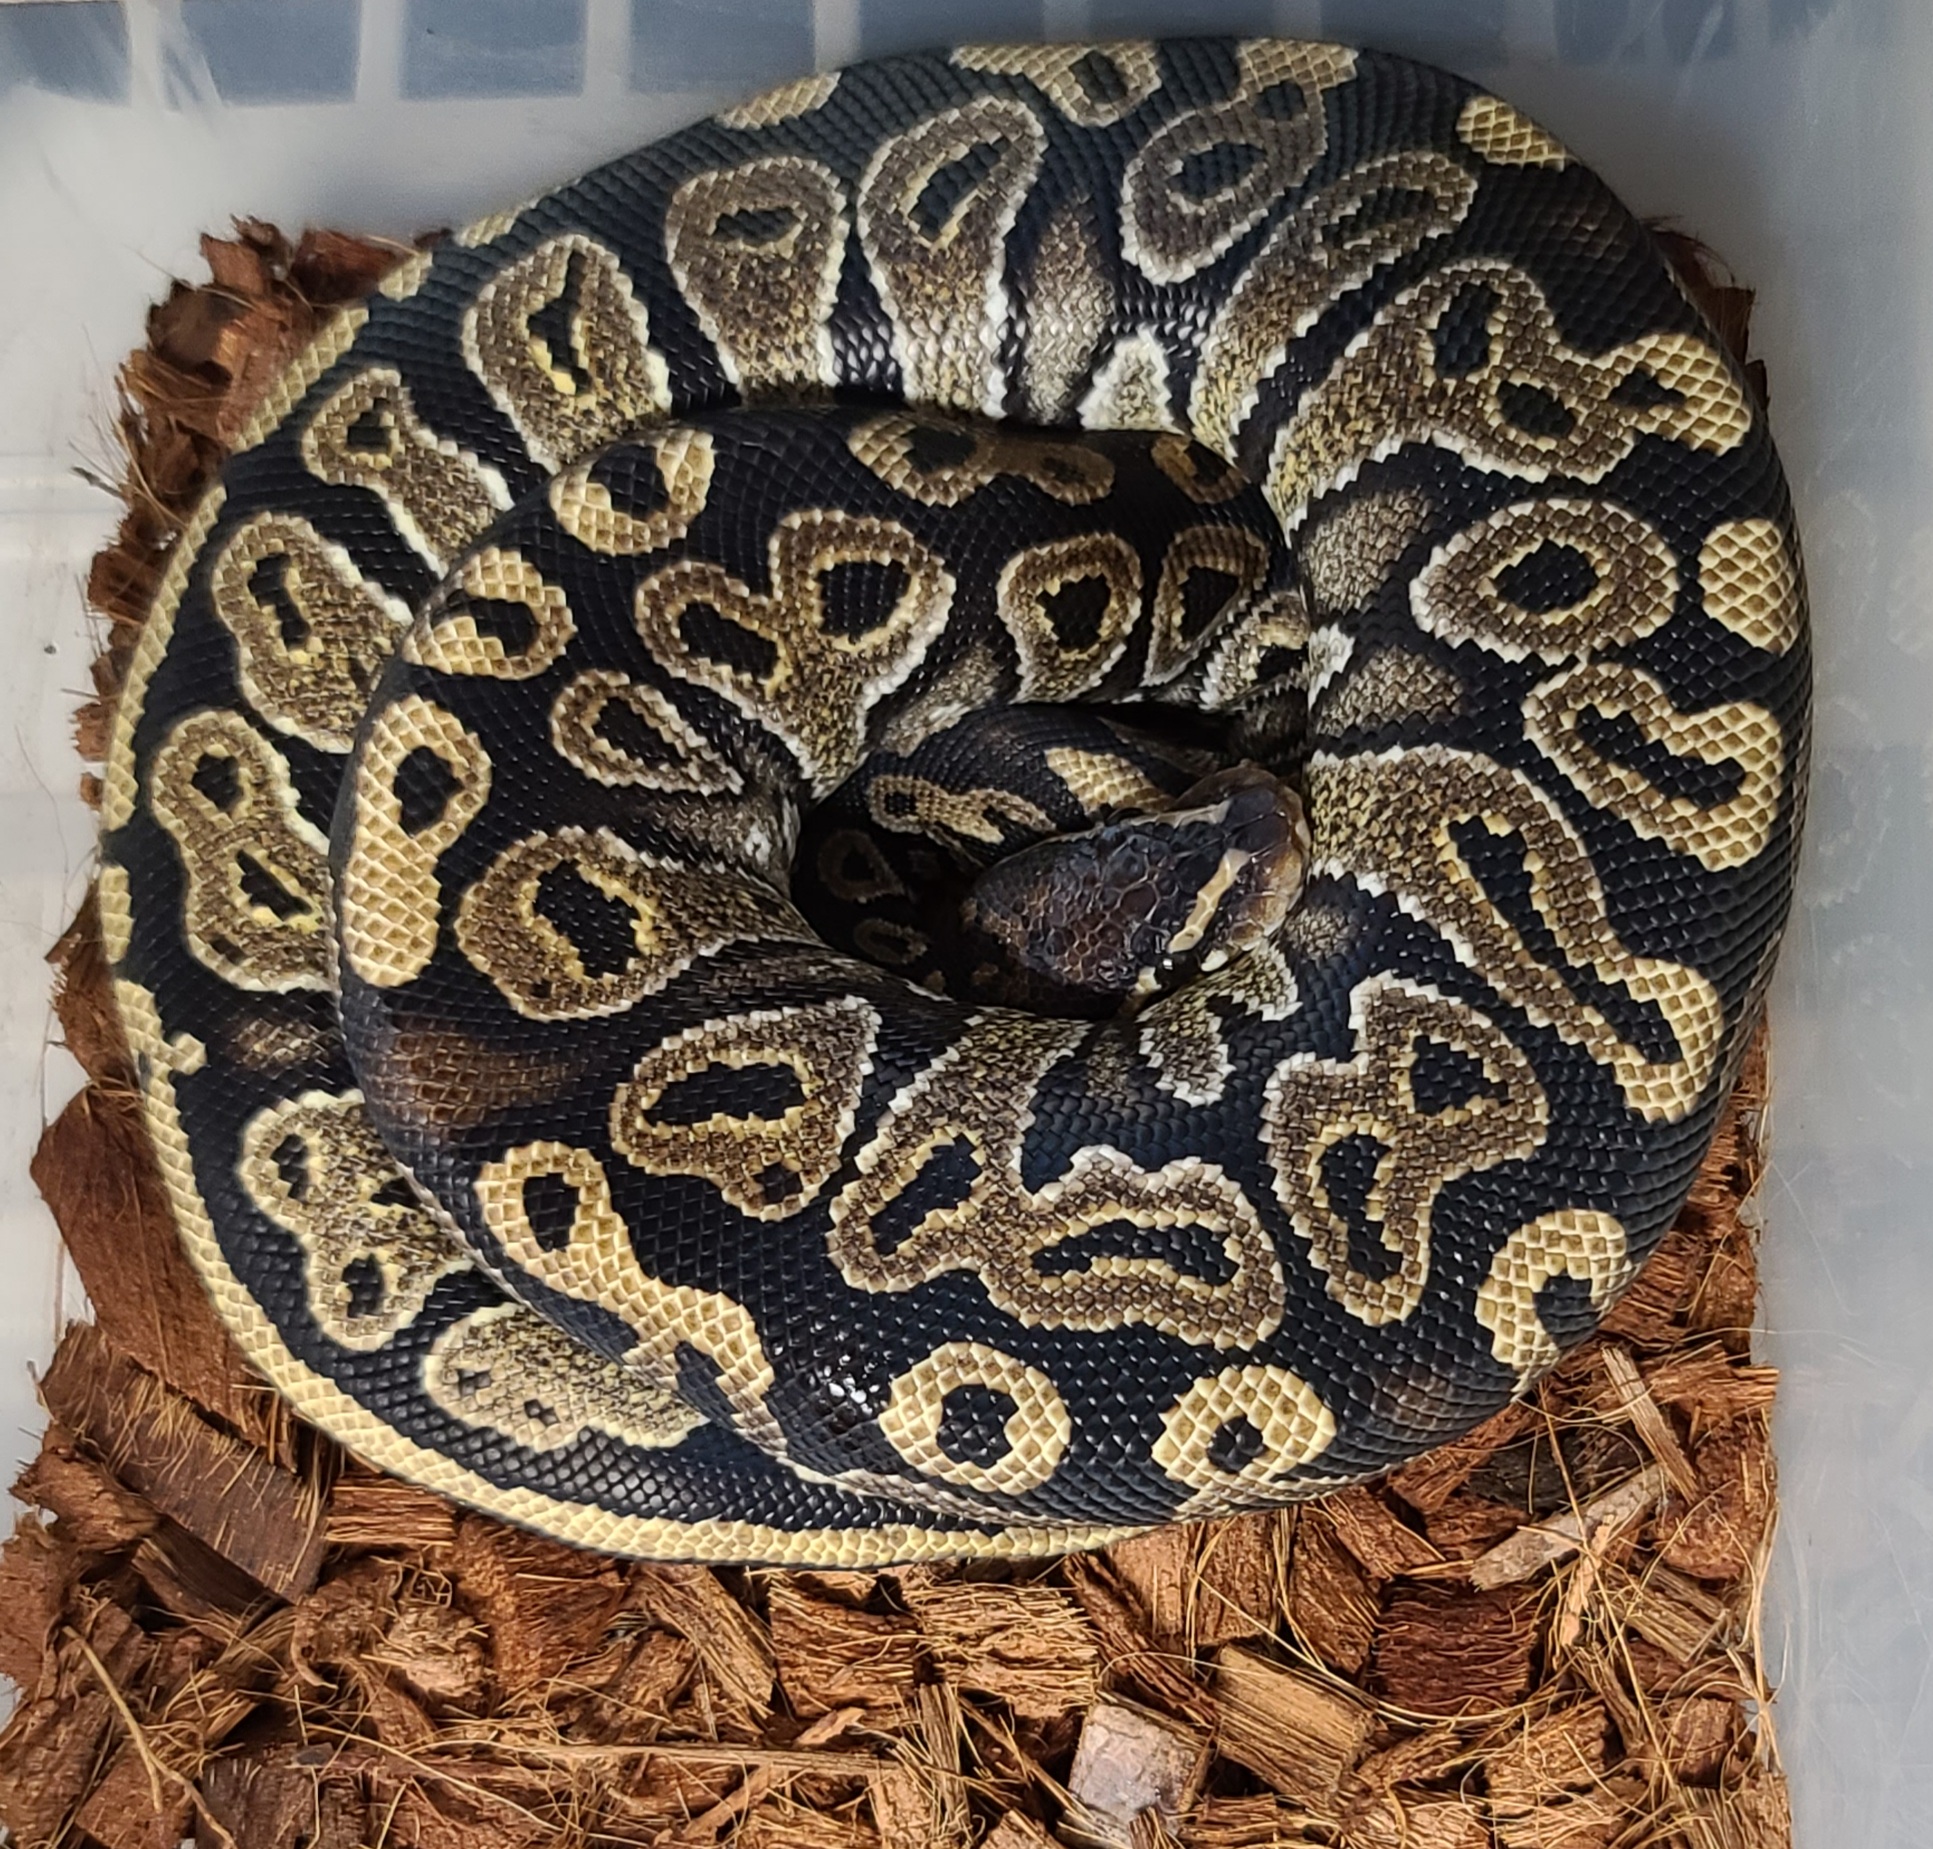 Epic Ball Python by OCD Morphs